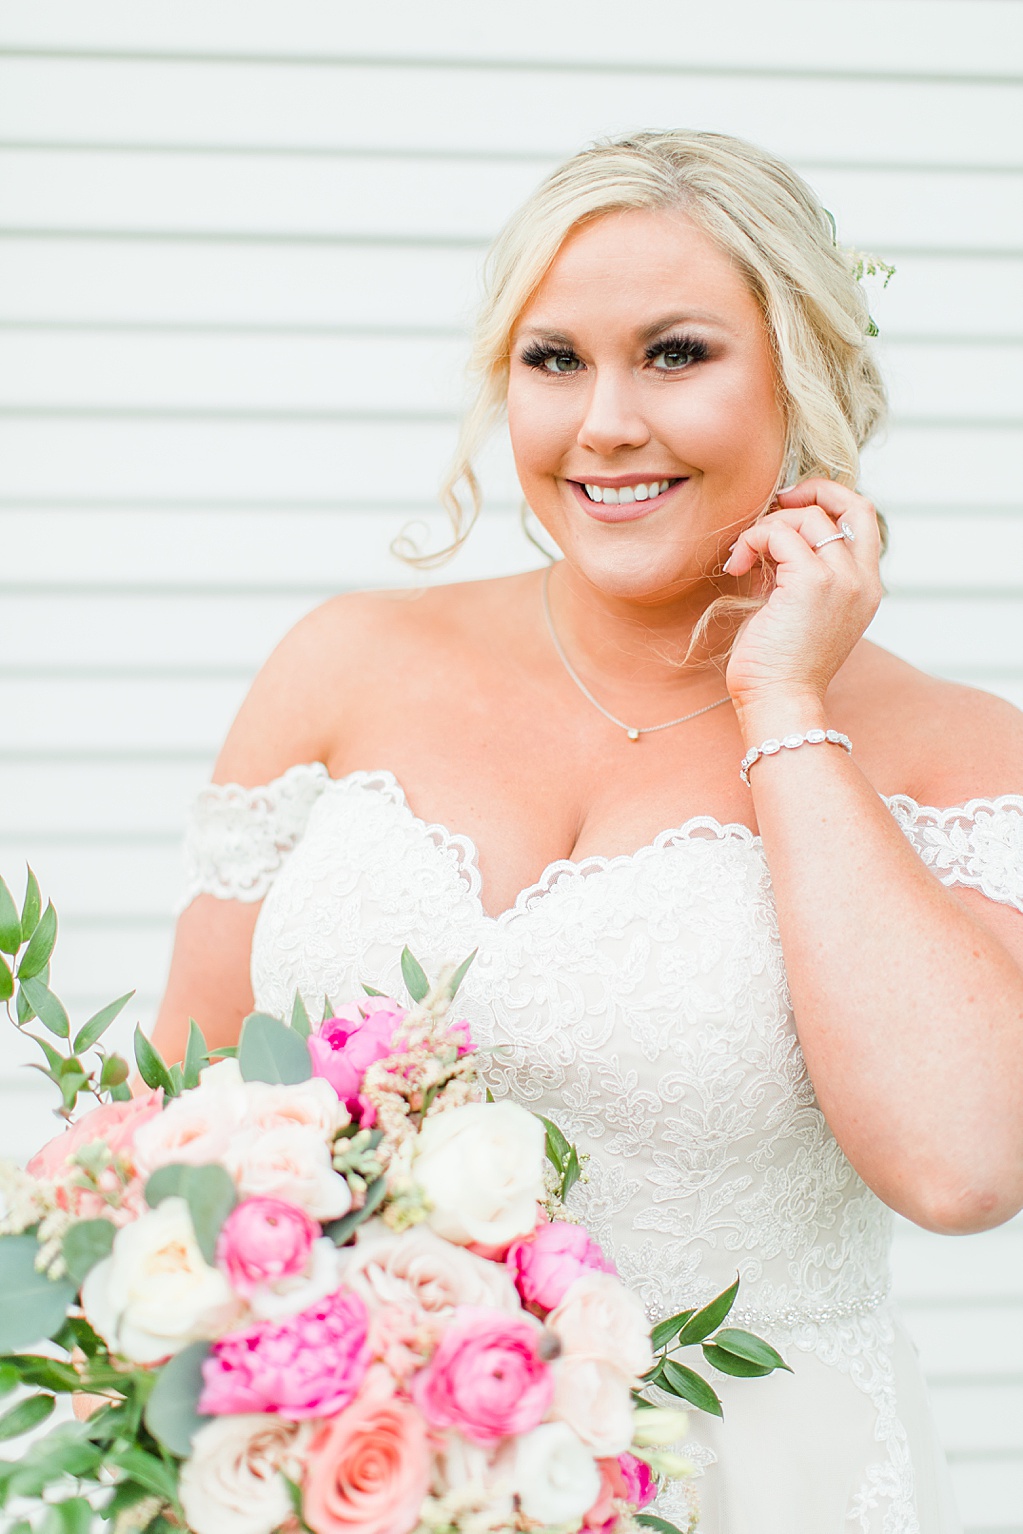 Spring Bridal Photos at The Chandelier of Gruene in New Braunfels texas 0016